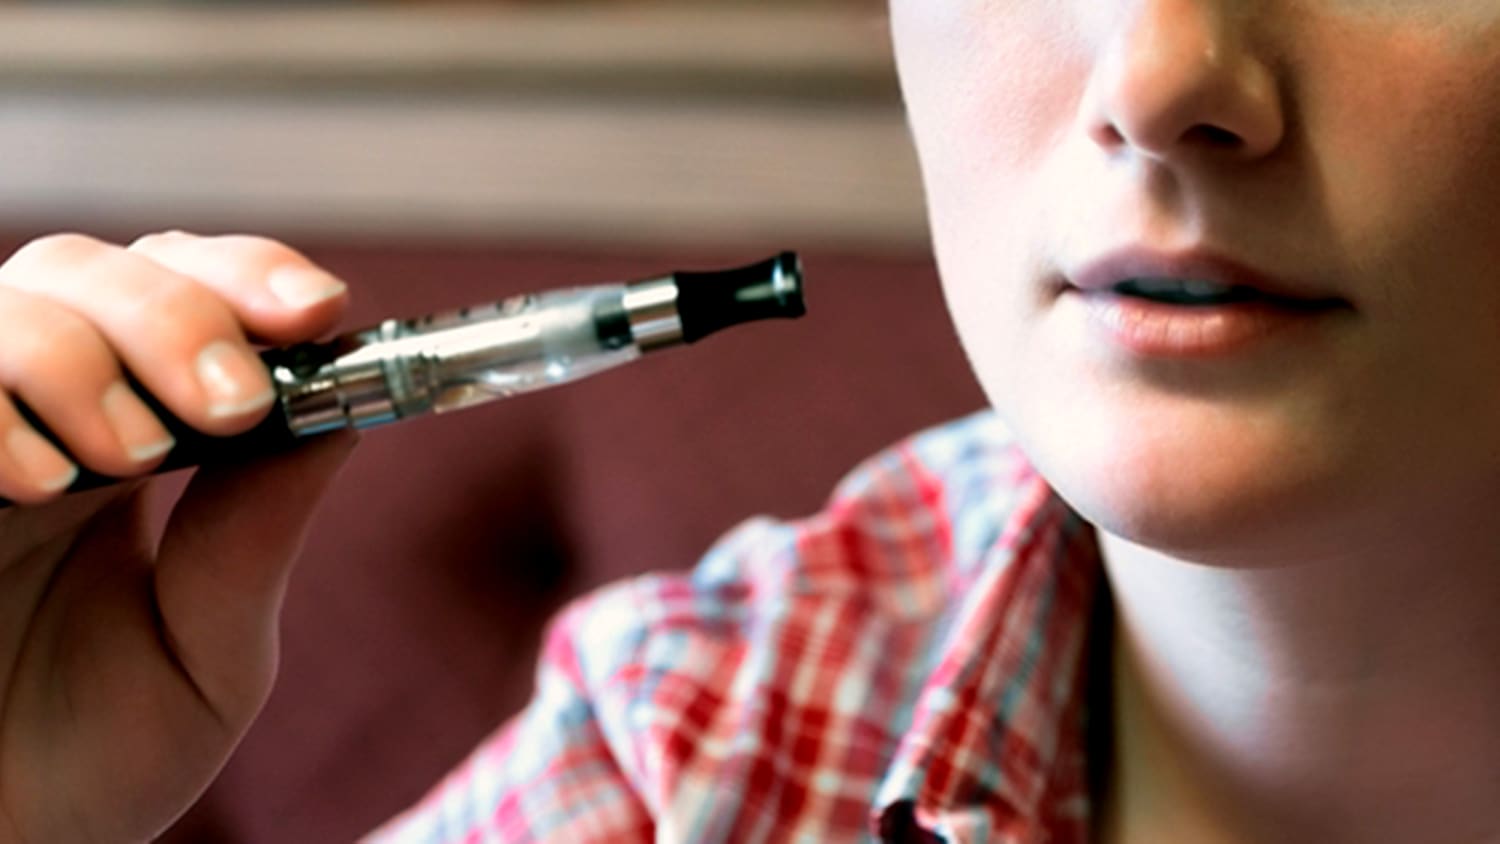 Cool factor: Teens report positive feedback to e-cigarettes